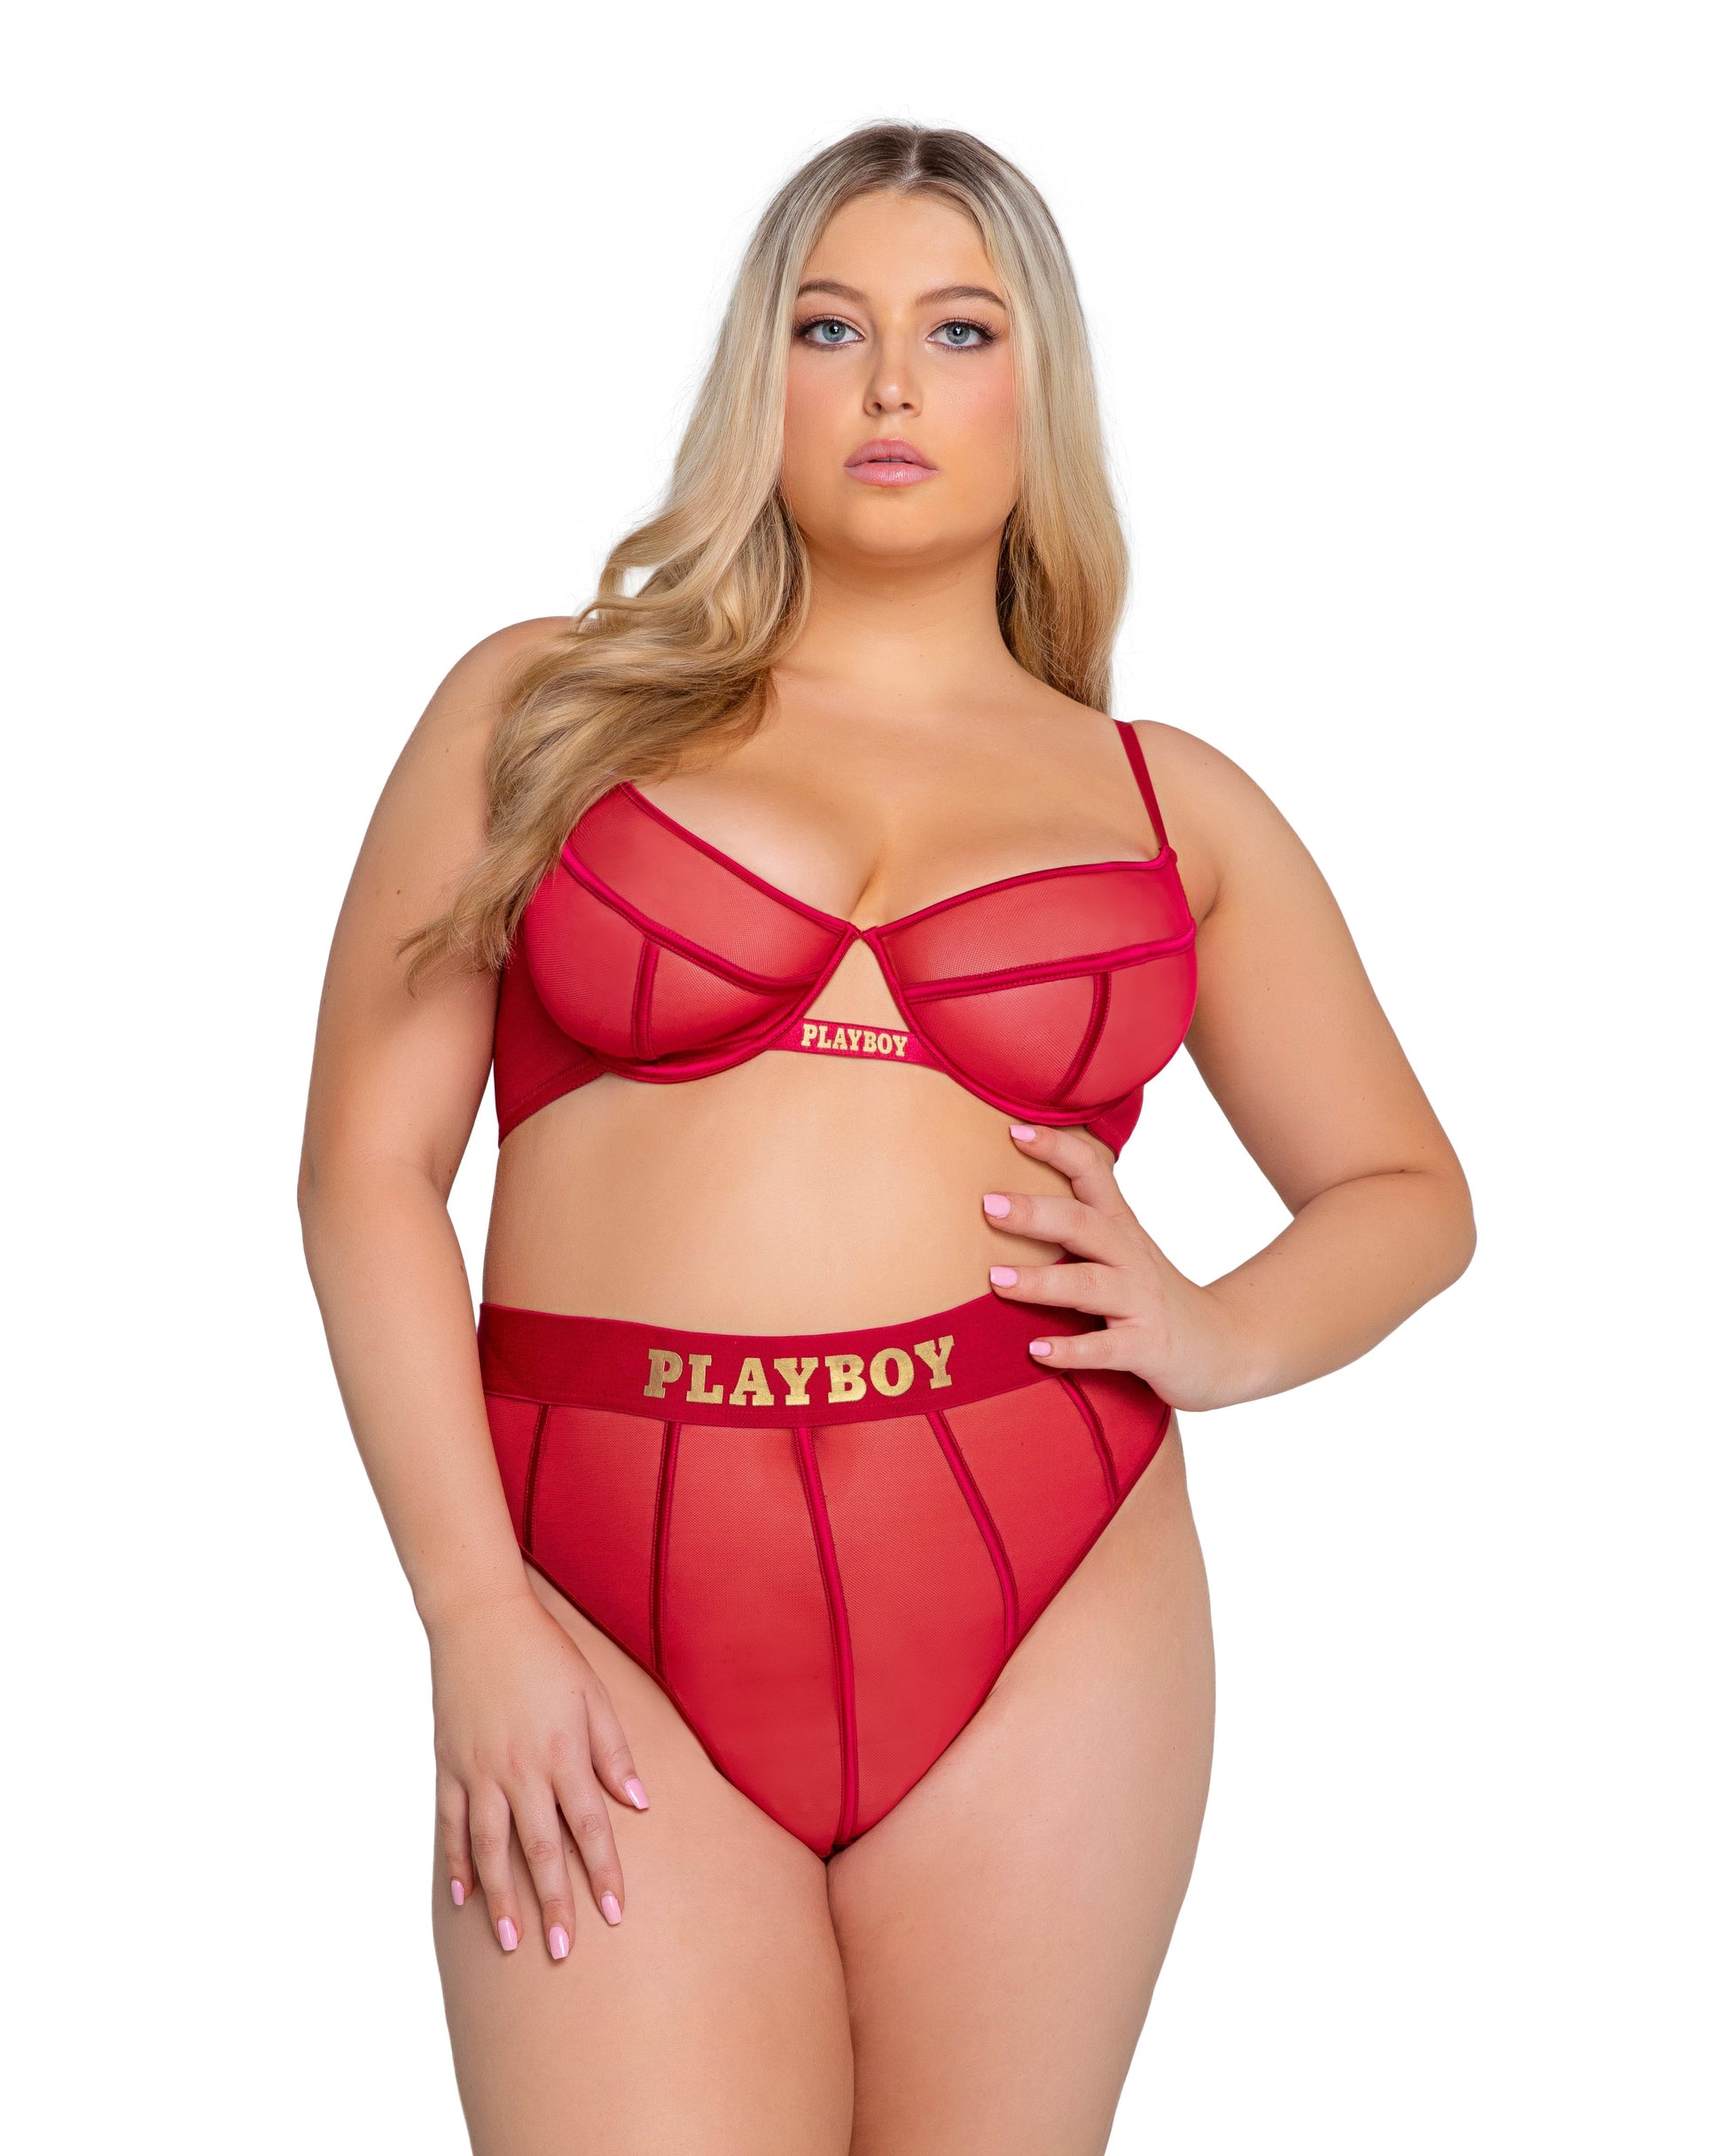 Roma Confidential Playboy Cage Bra Set Burgundy/Gold Queen Plus Size